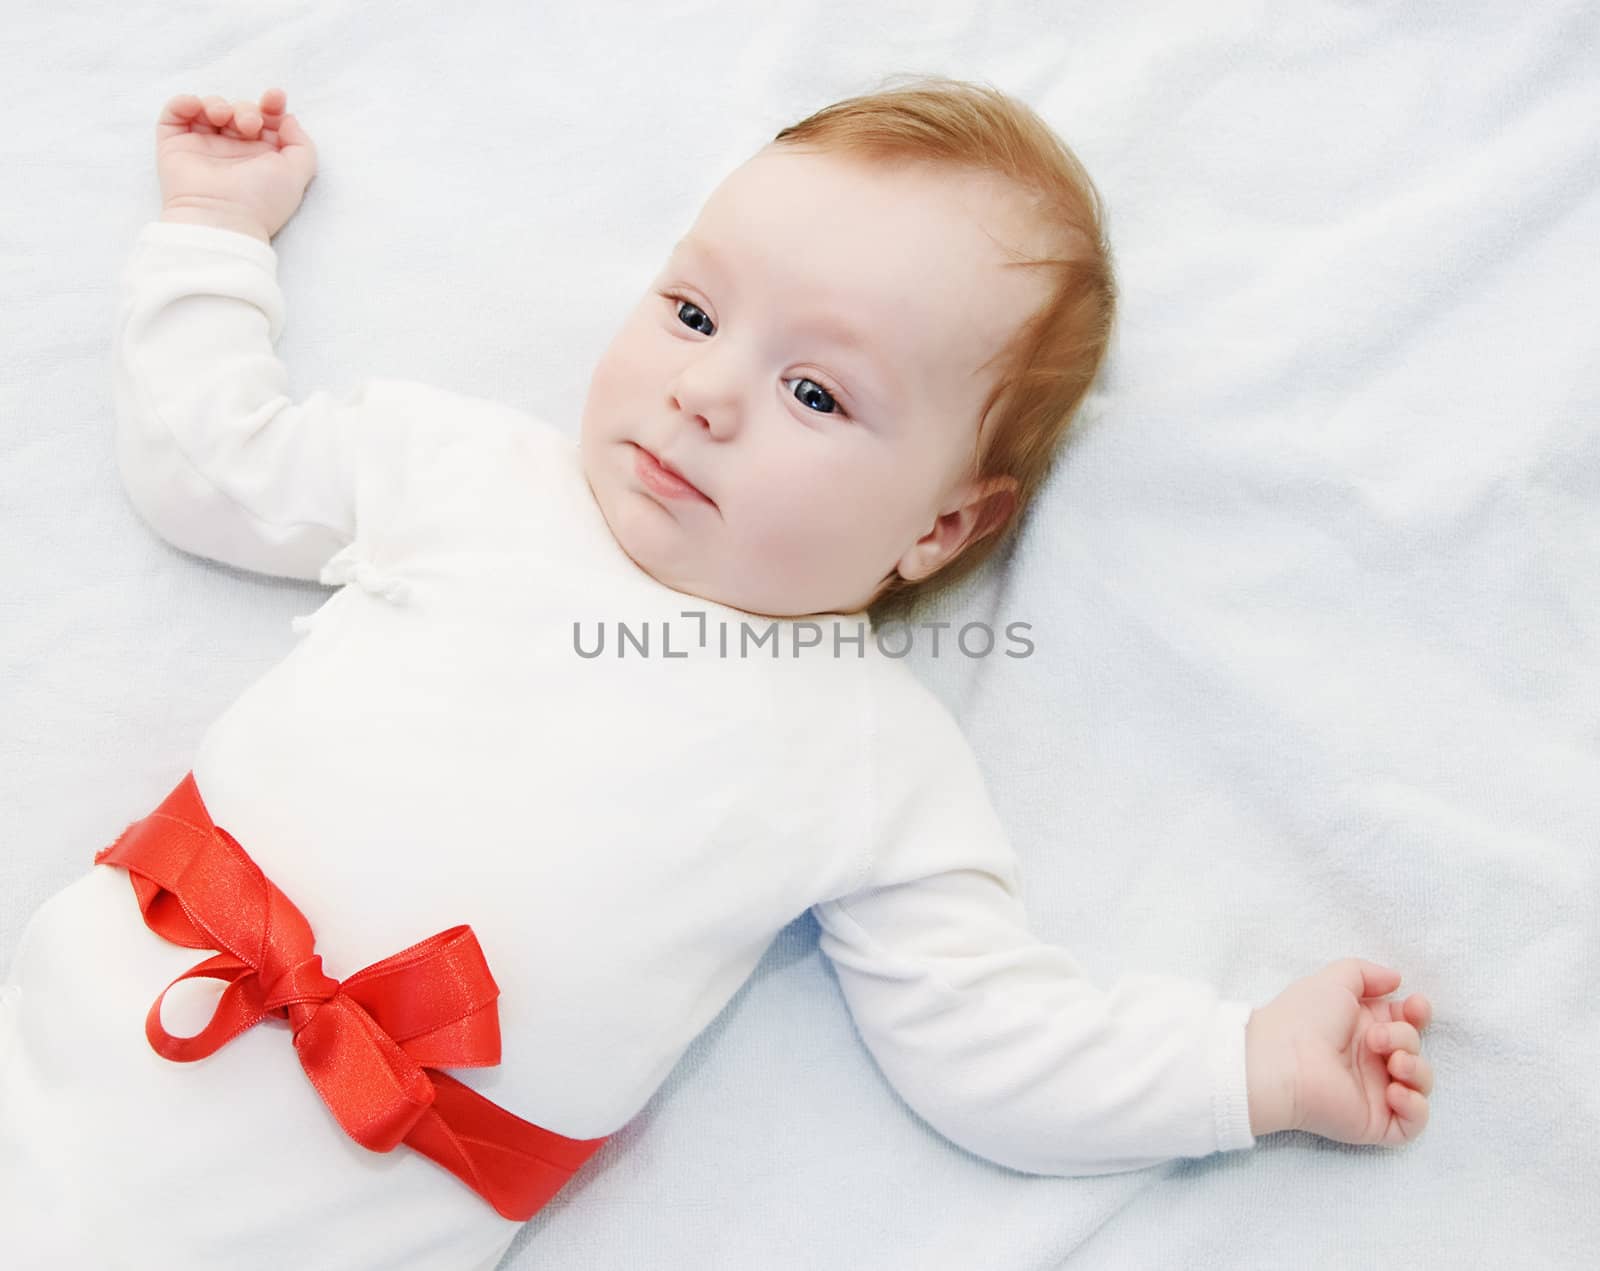 Adorable baby boy in light with red ribbon as gift